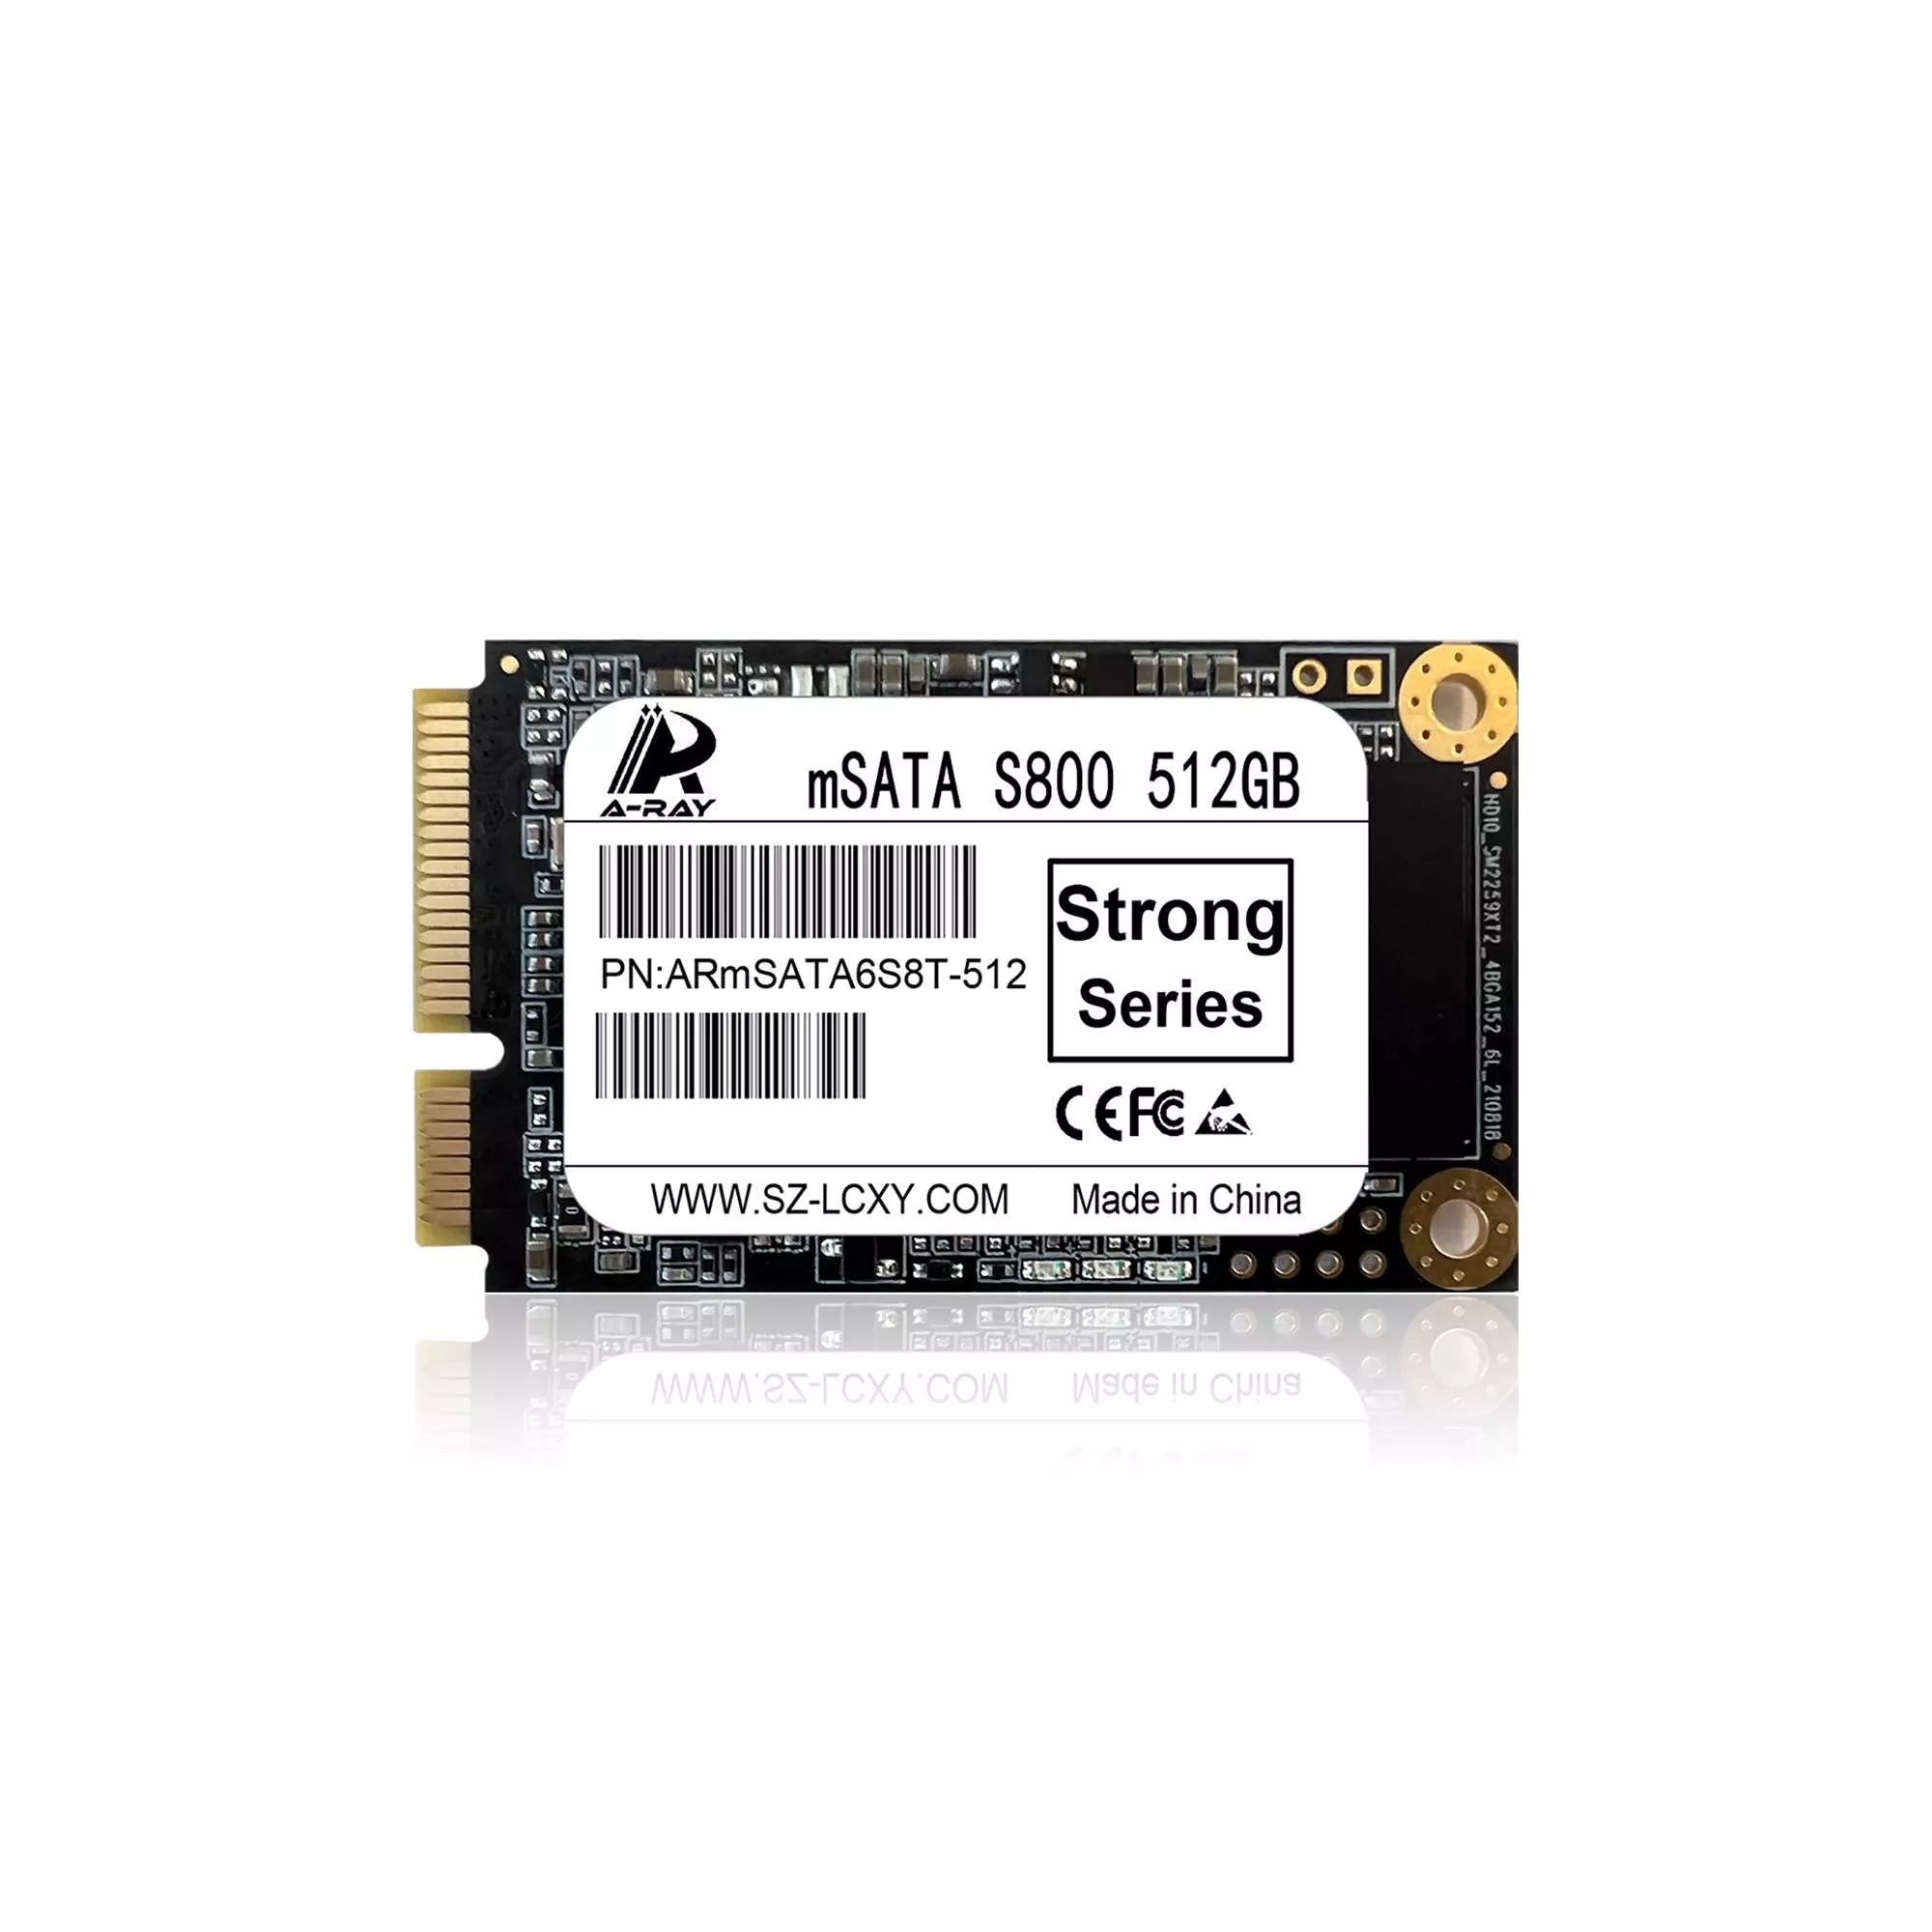 Ổ cứng SSD 512GB A-RAY mSata 6GBps S800 Strong Series